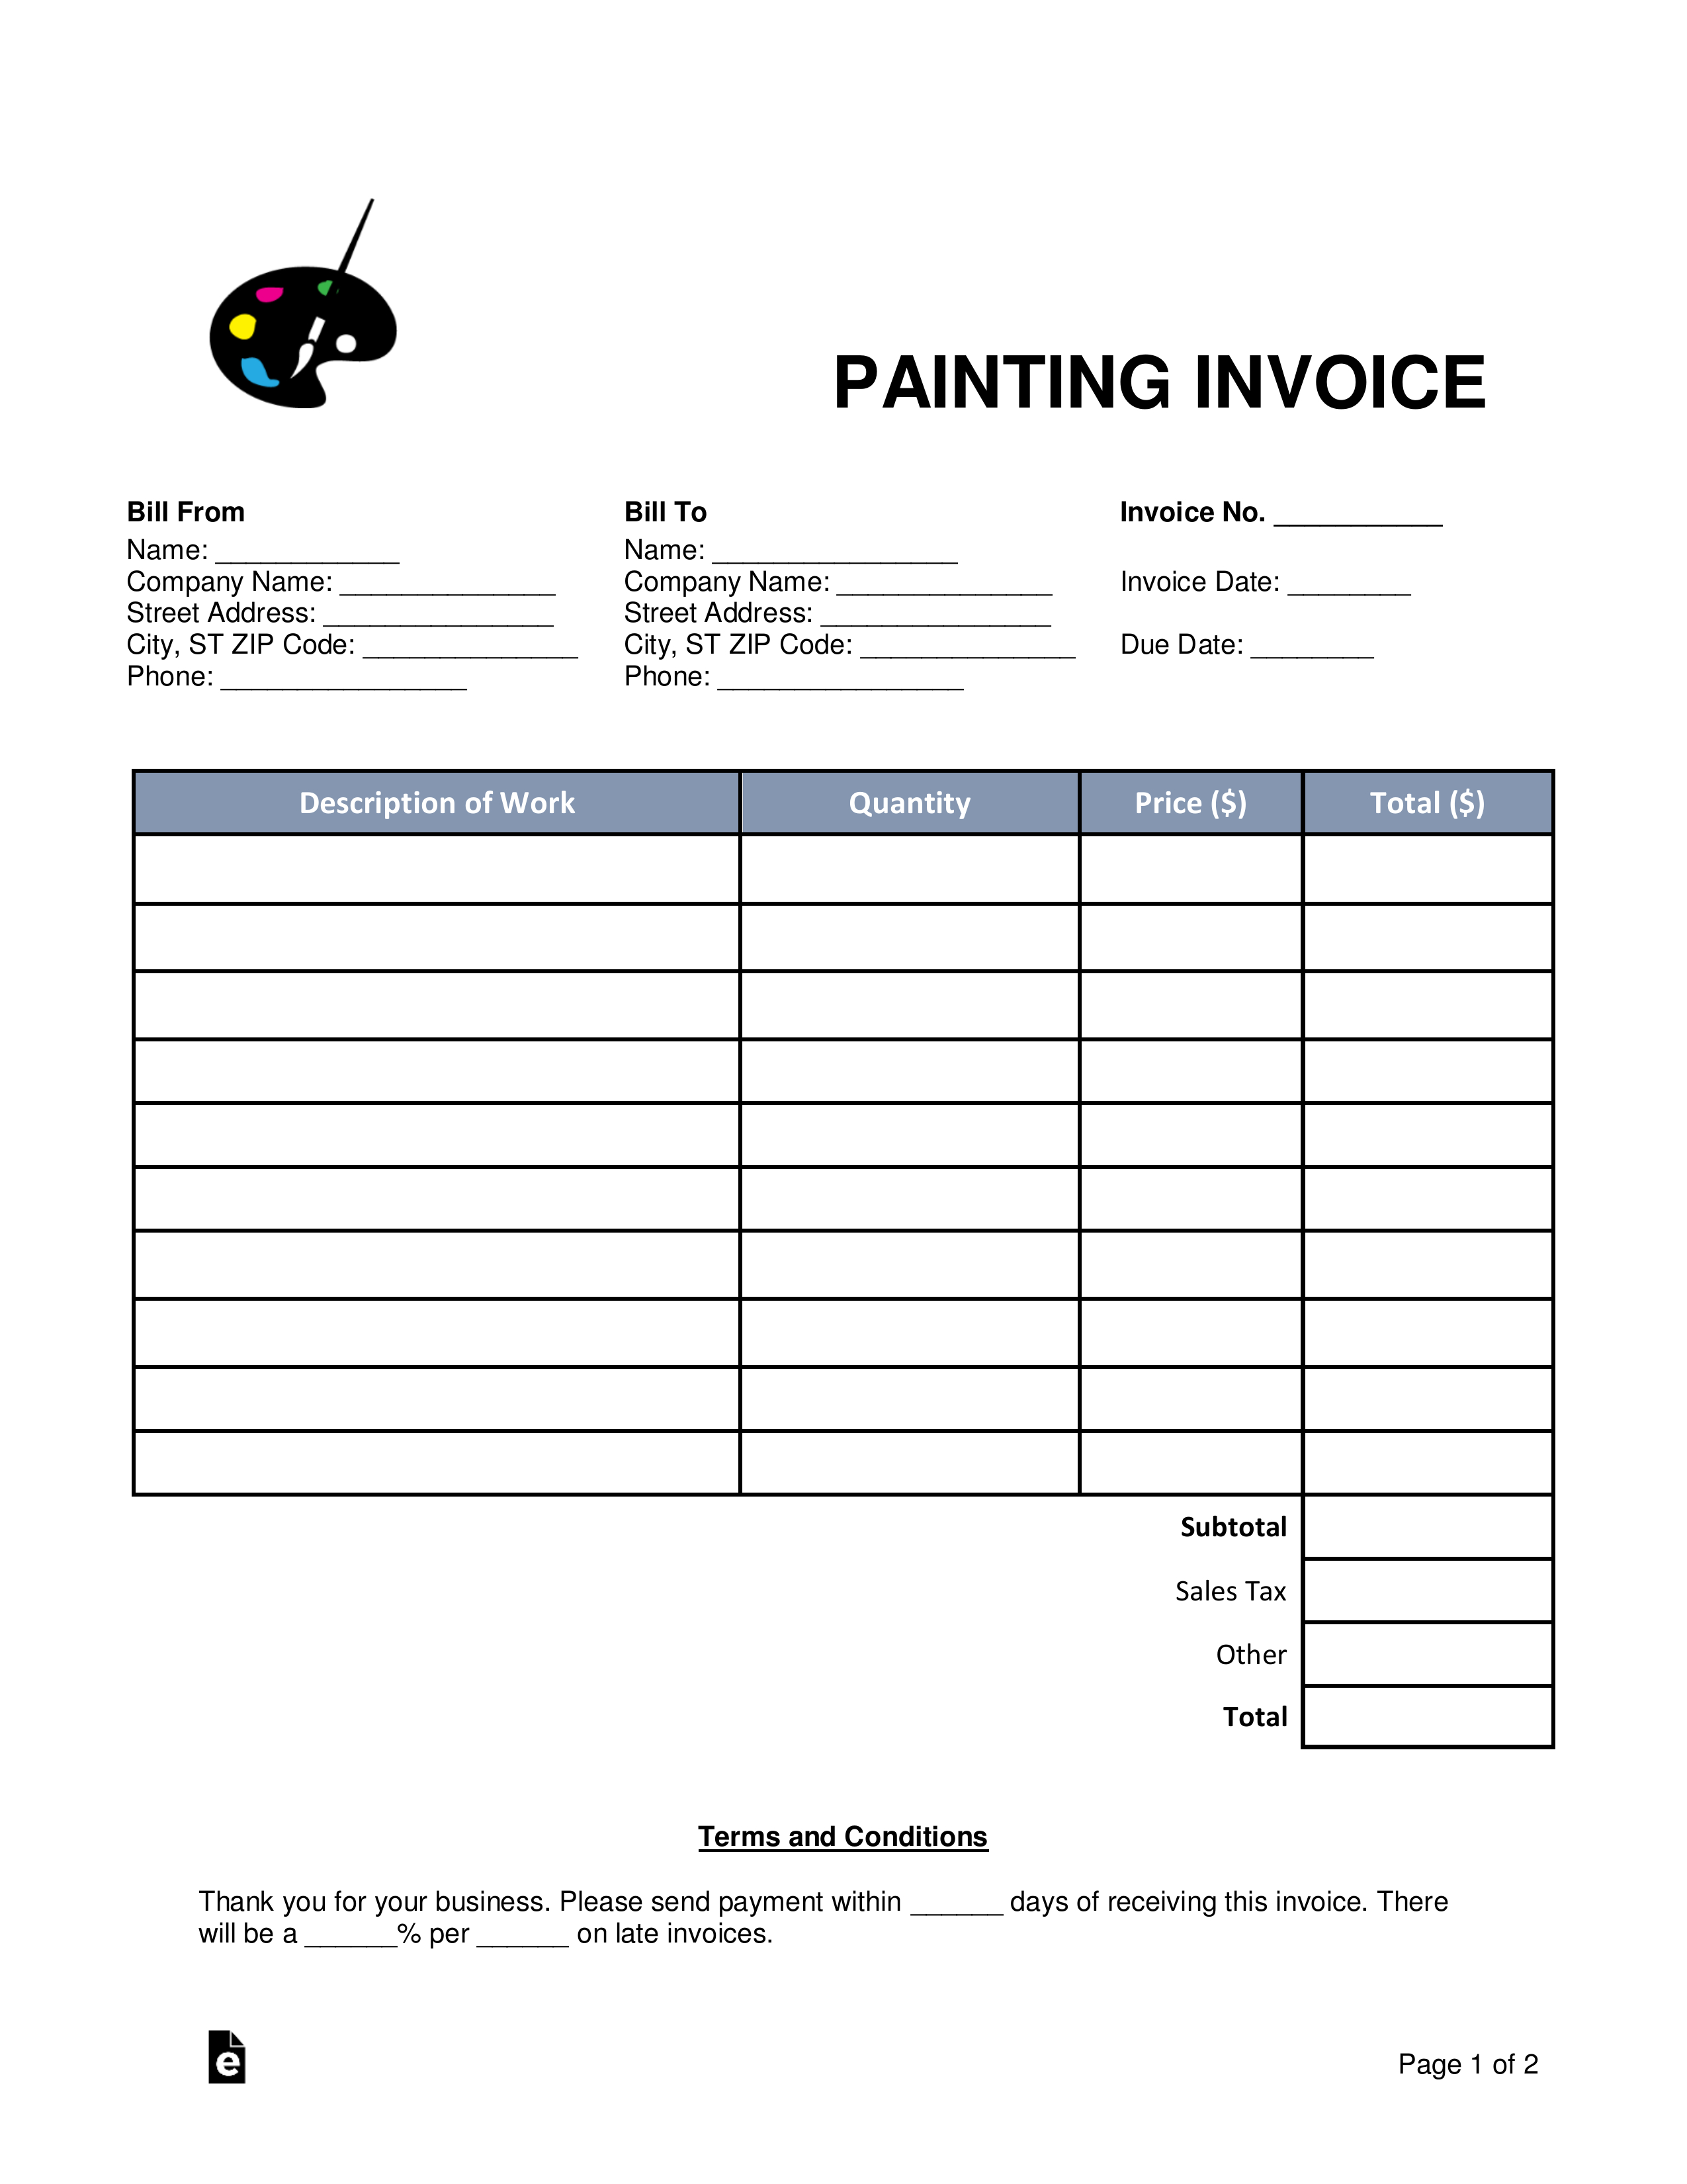 Free Painting Invoice Template - Word | Pdf | Eforms – Free in Painter Invoice Template